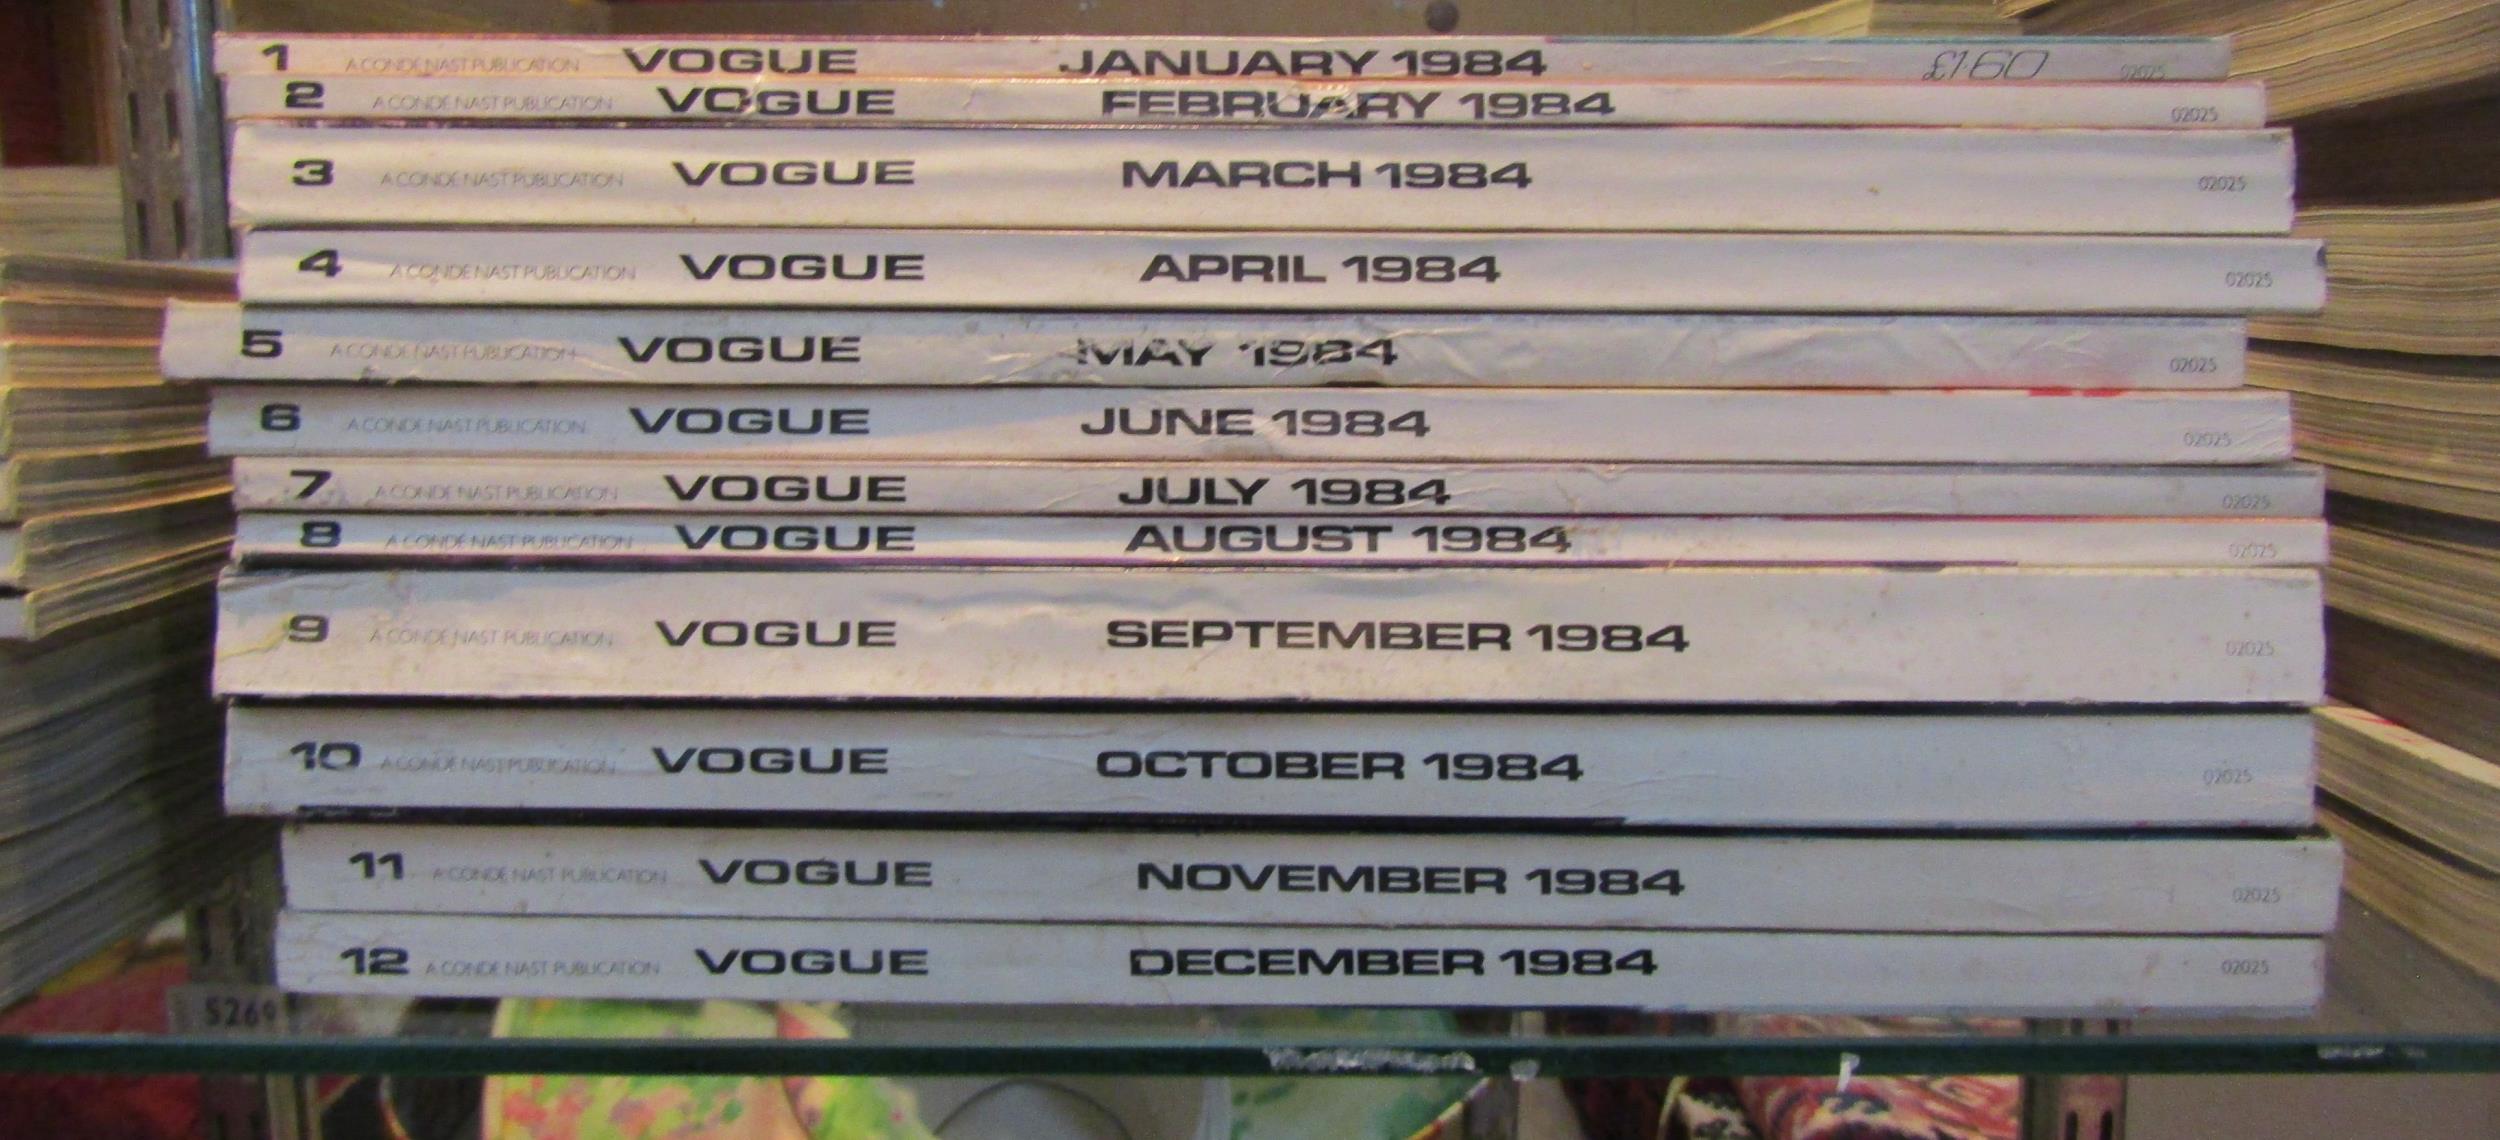 British Vogue magazine 1980 - January (1), February (2), March 1st (3), March 15th (4), April 1st ( - Image 13 of 40